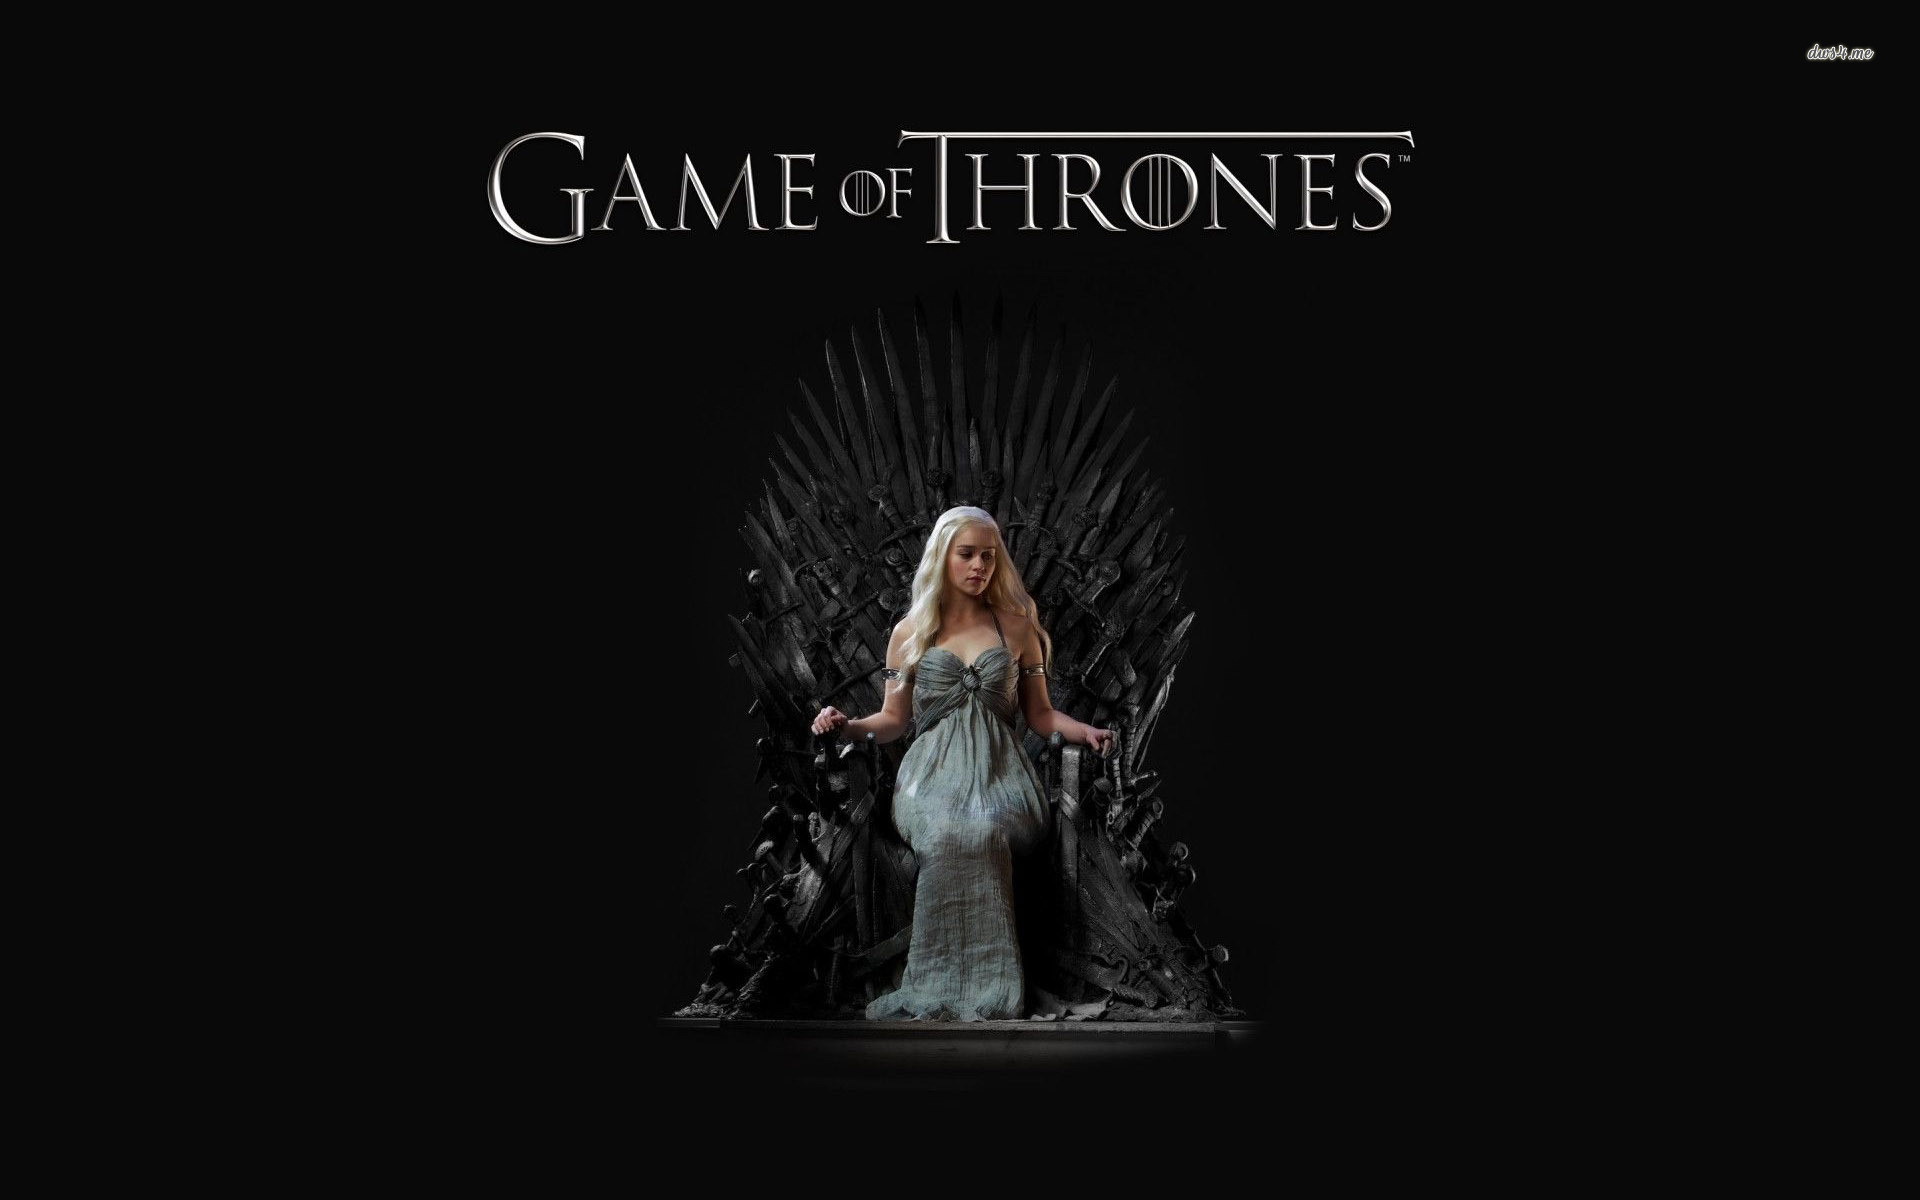 High Quality HD Game of Thrones wallpapers 95478 is free HD wallpaper .